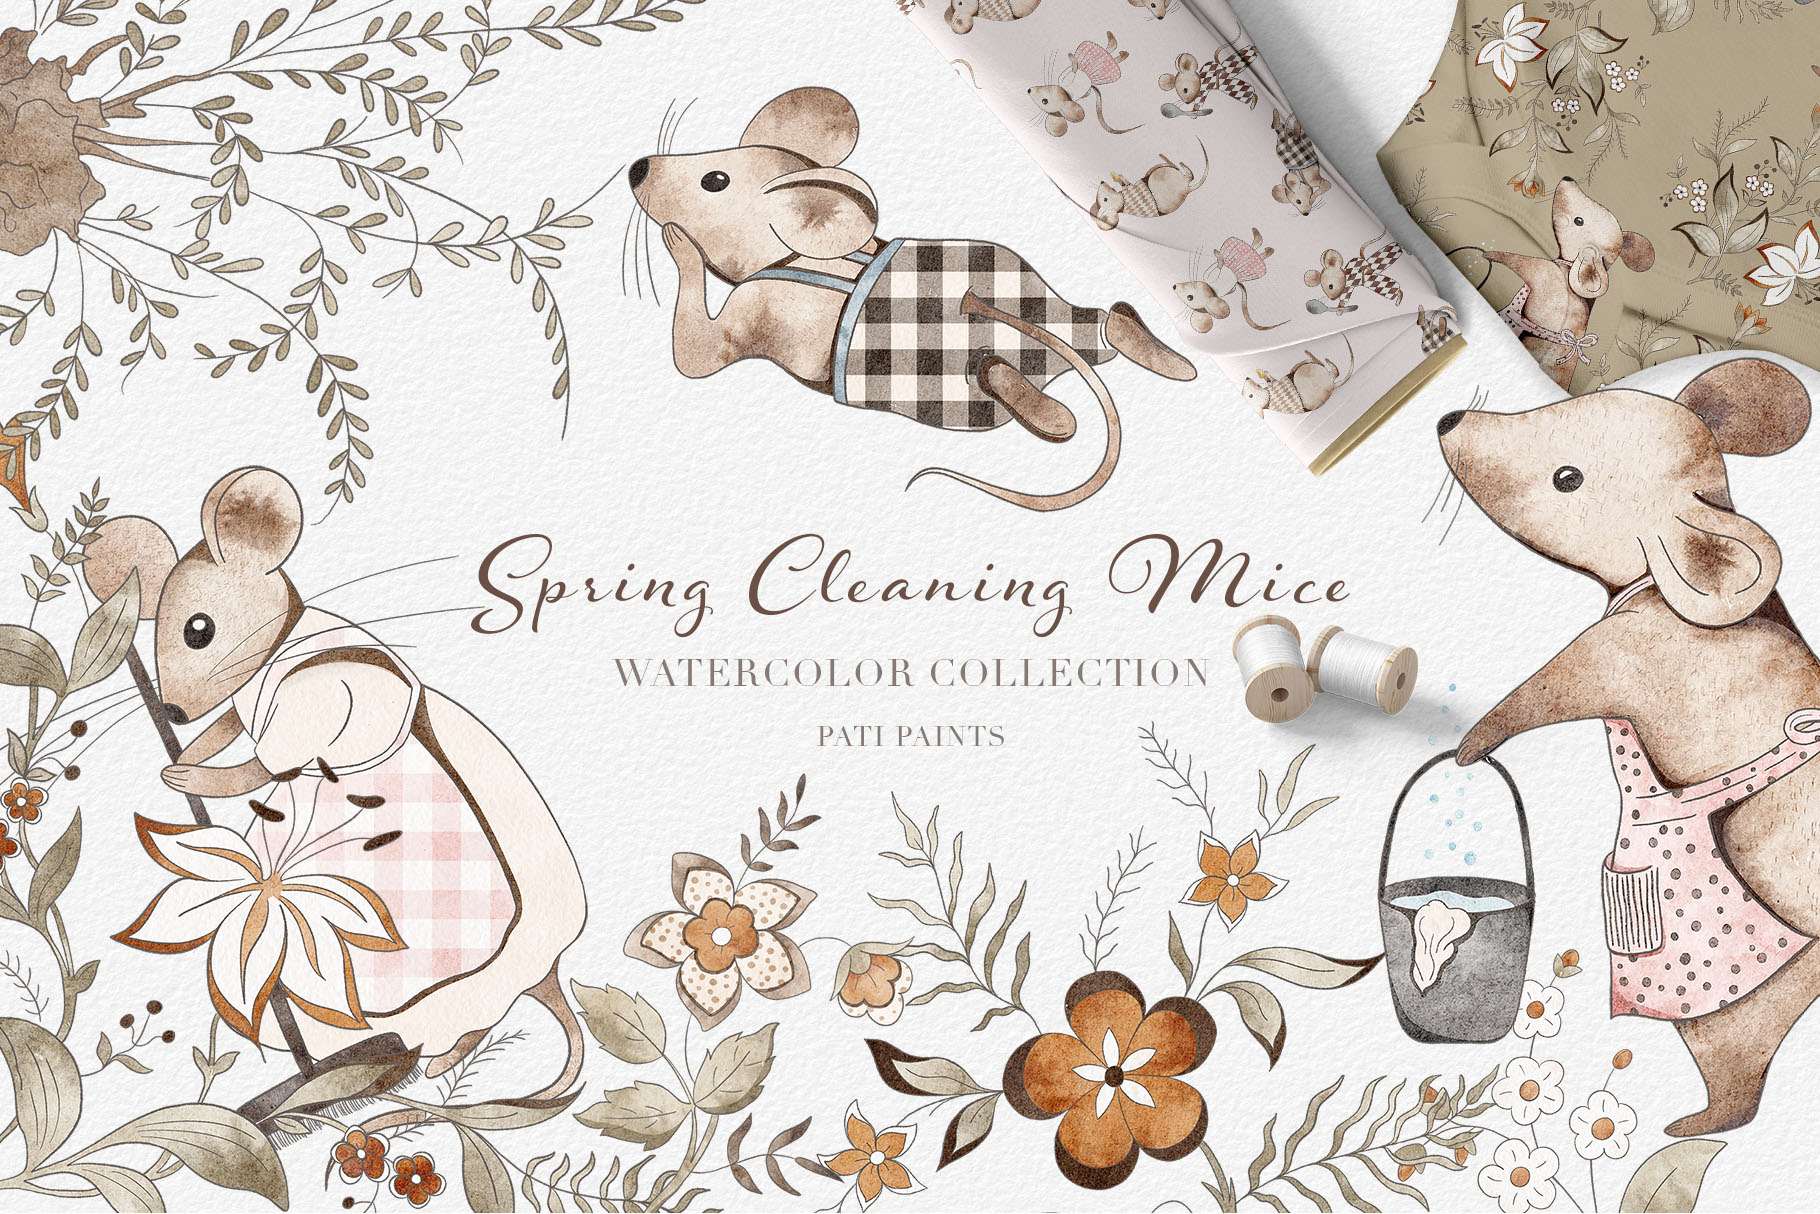 Watercolor Spring Cleaning Cute Mice Nursery Art Collection.